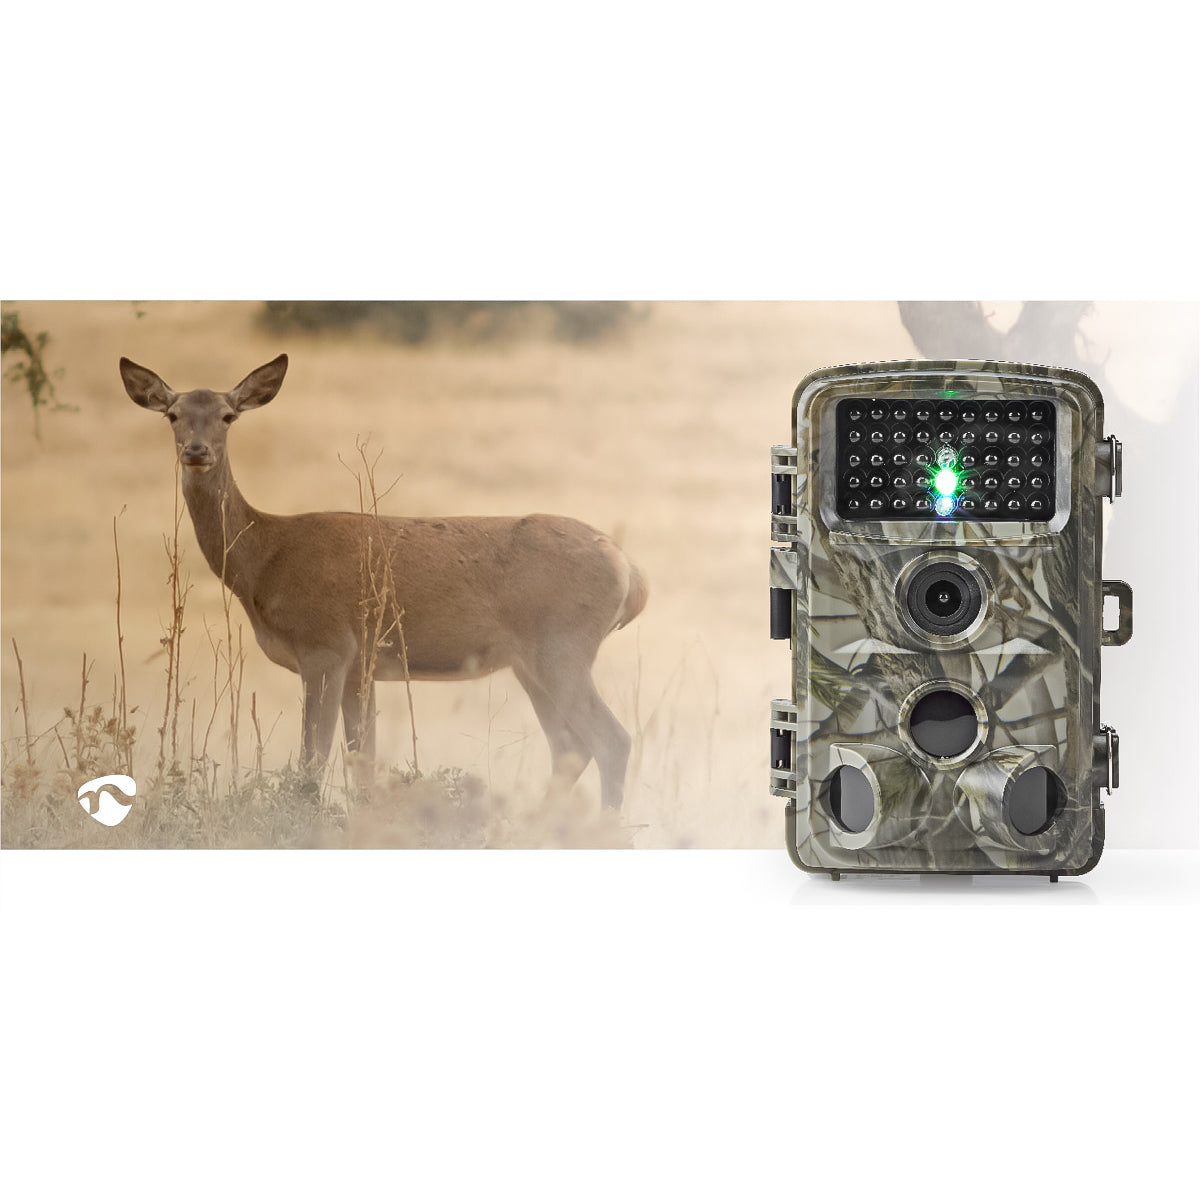 Nedis Camouflage Camera 1080p 30fps, 24MP camera with 2.4" screen, IR black without light, night vision, motion sensor camera, wildlife monitoring